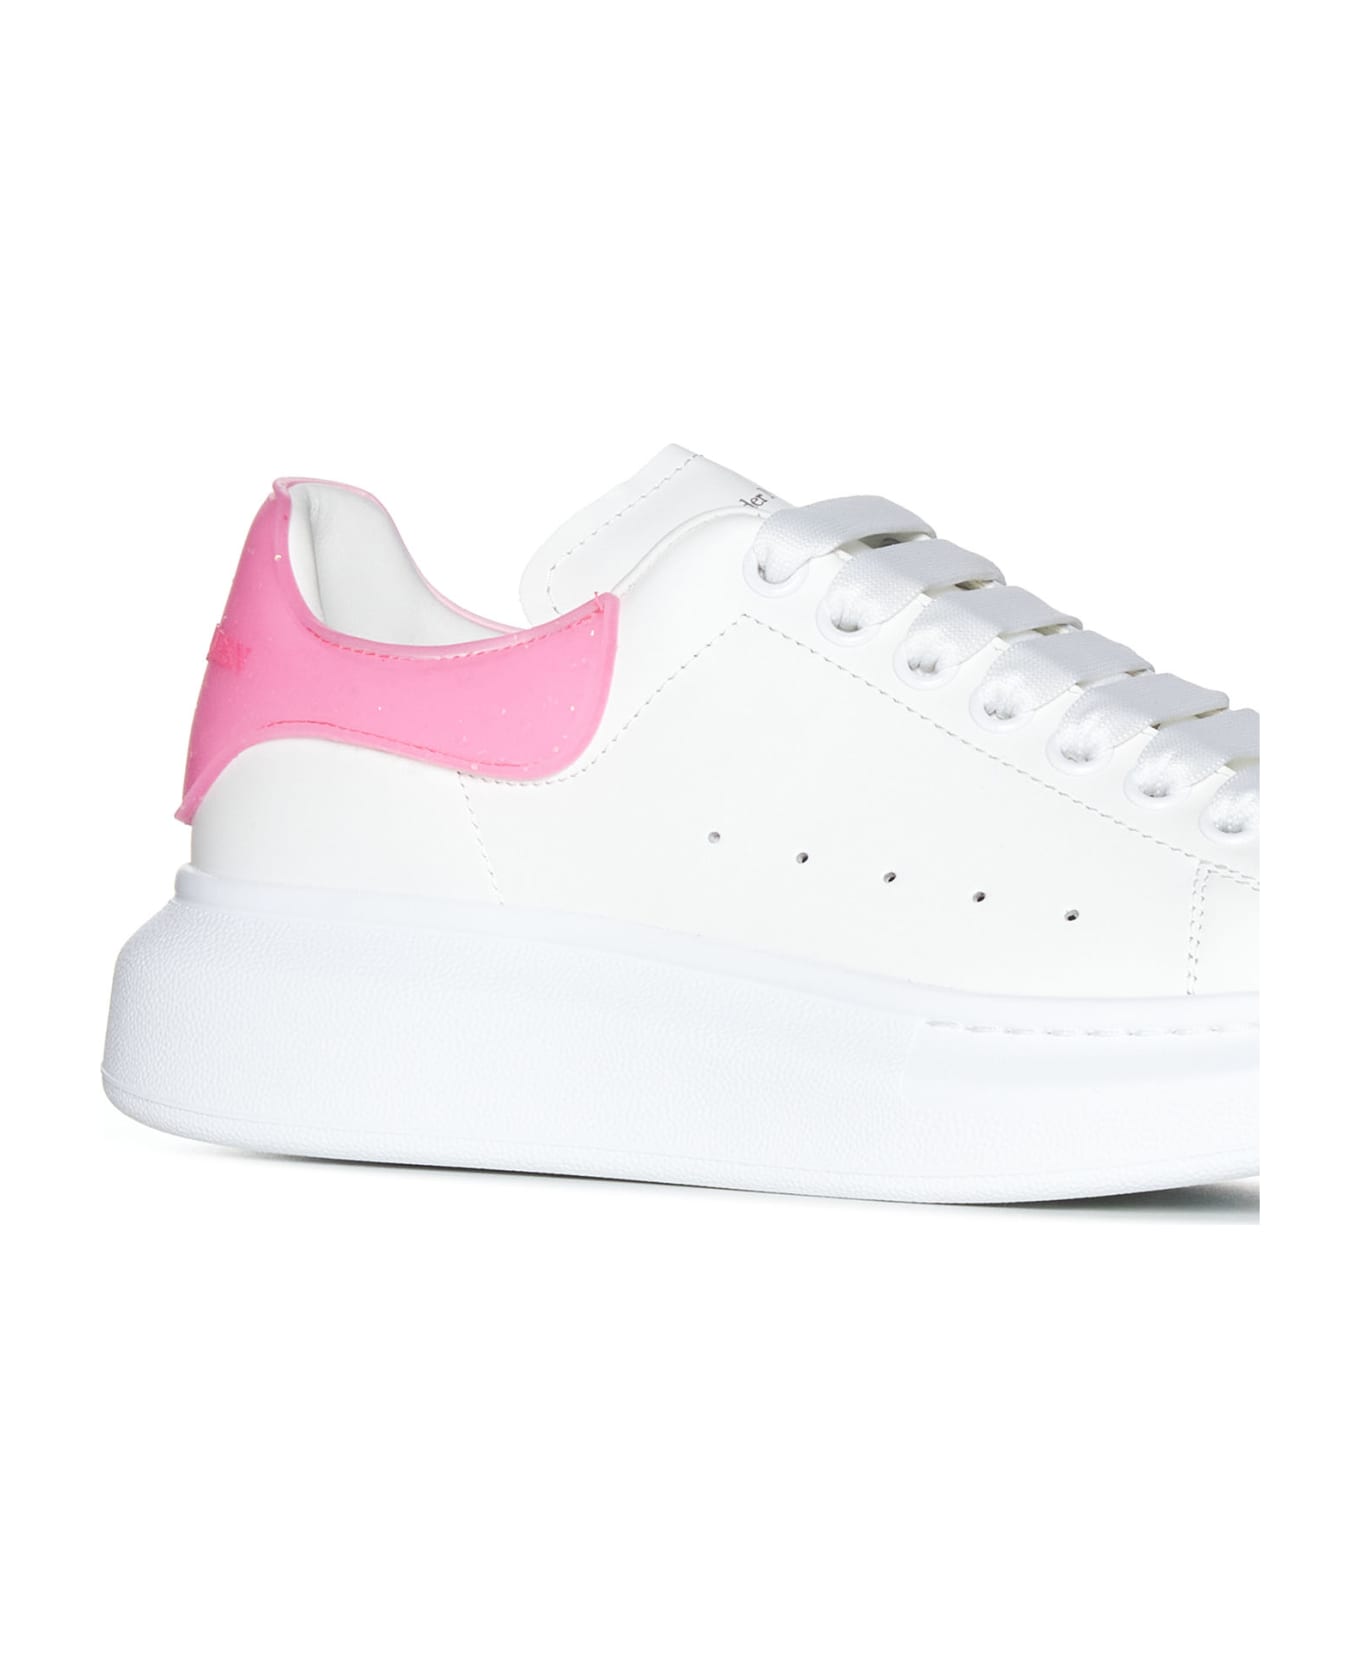 Alexander McQueen Sneakers - White/bright pink